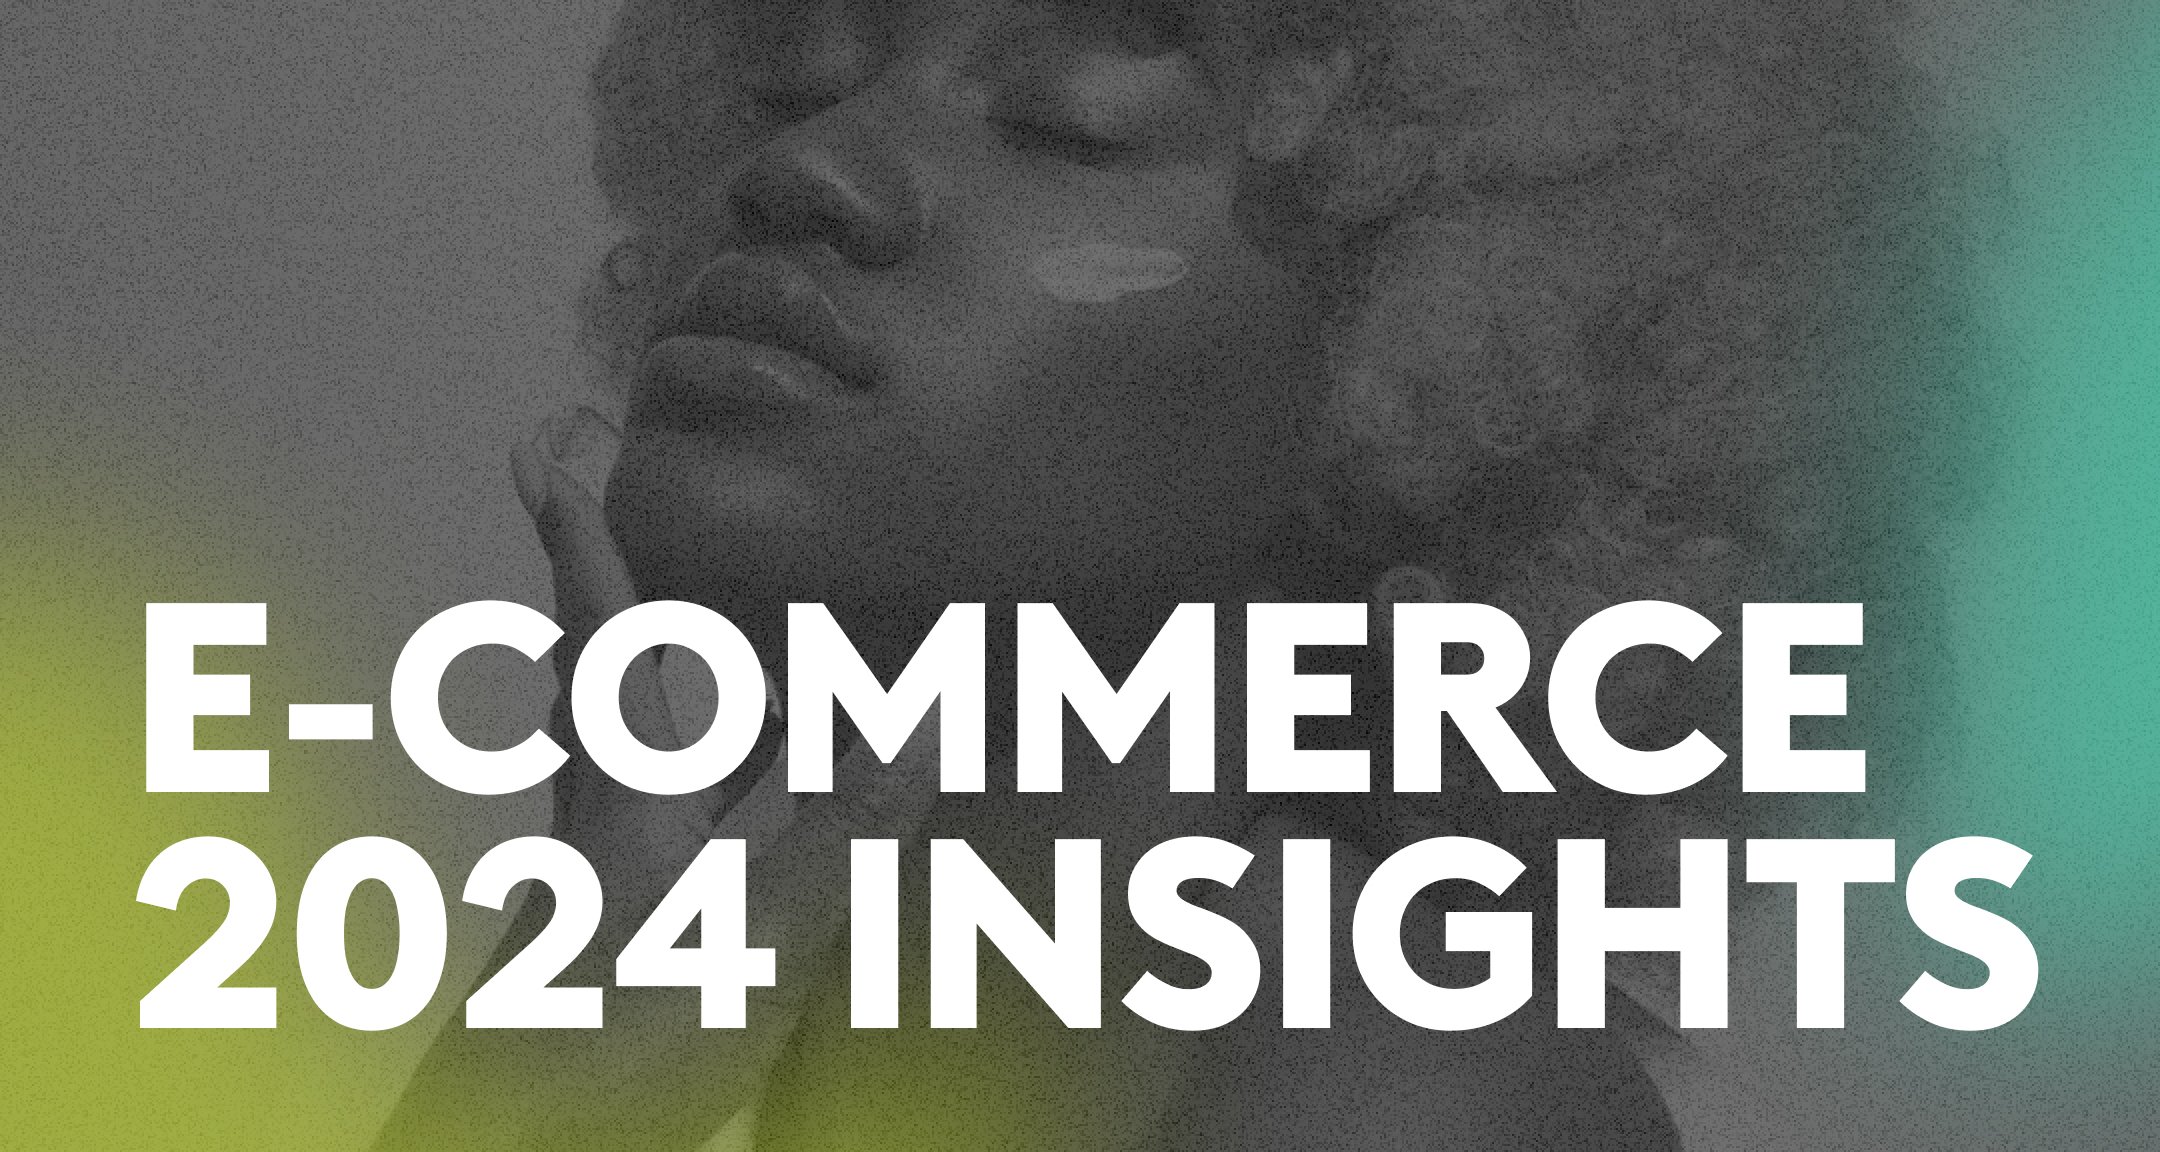 50+ eCommerce Statistics to Shape Your Strategy for 2024